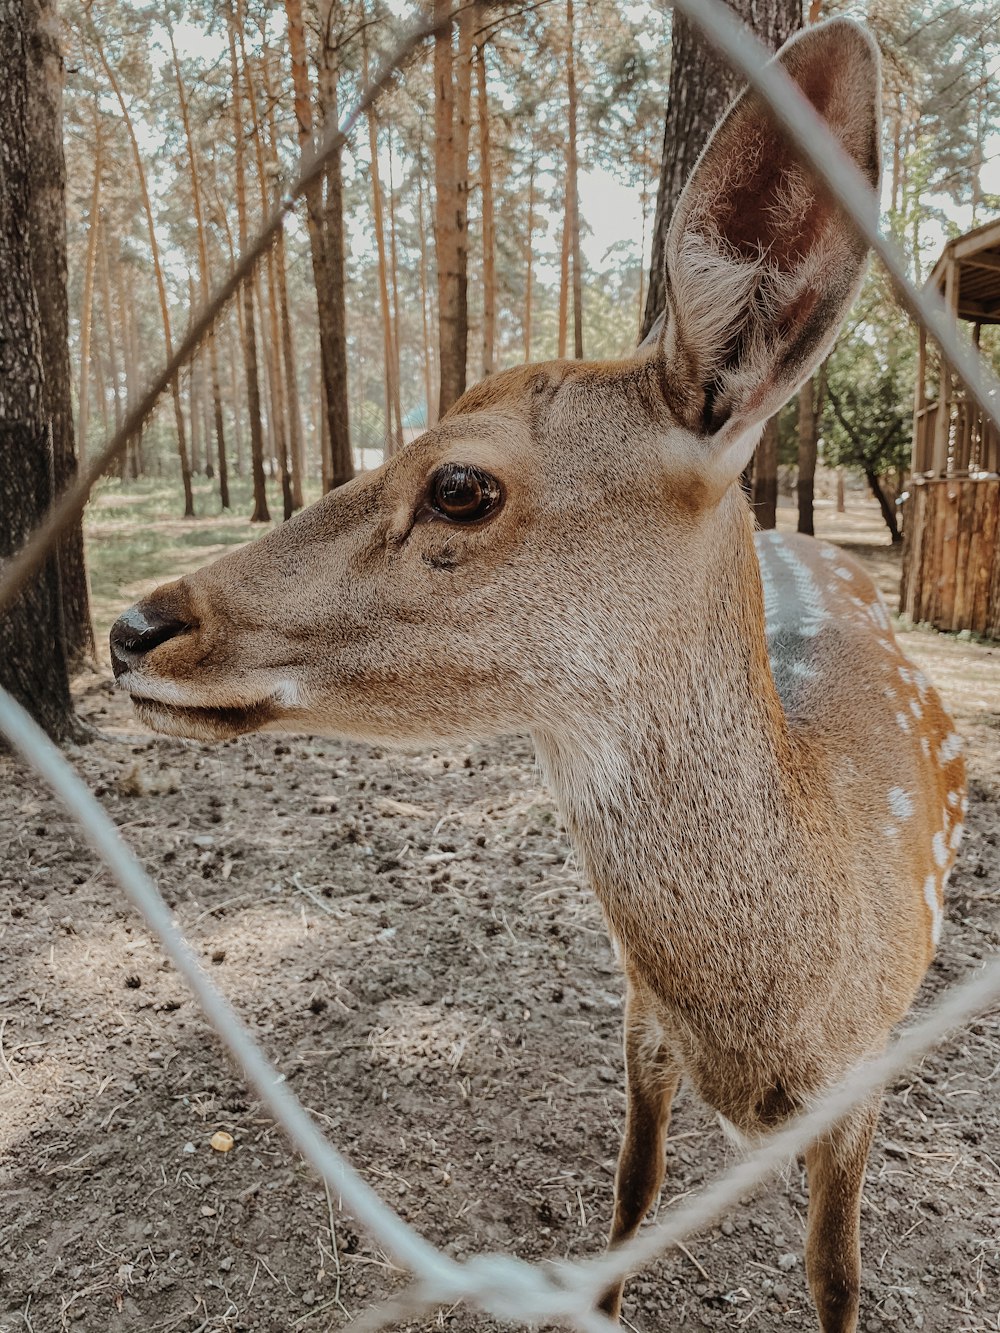 a deer looking through a wire fence in the woods